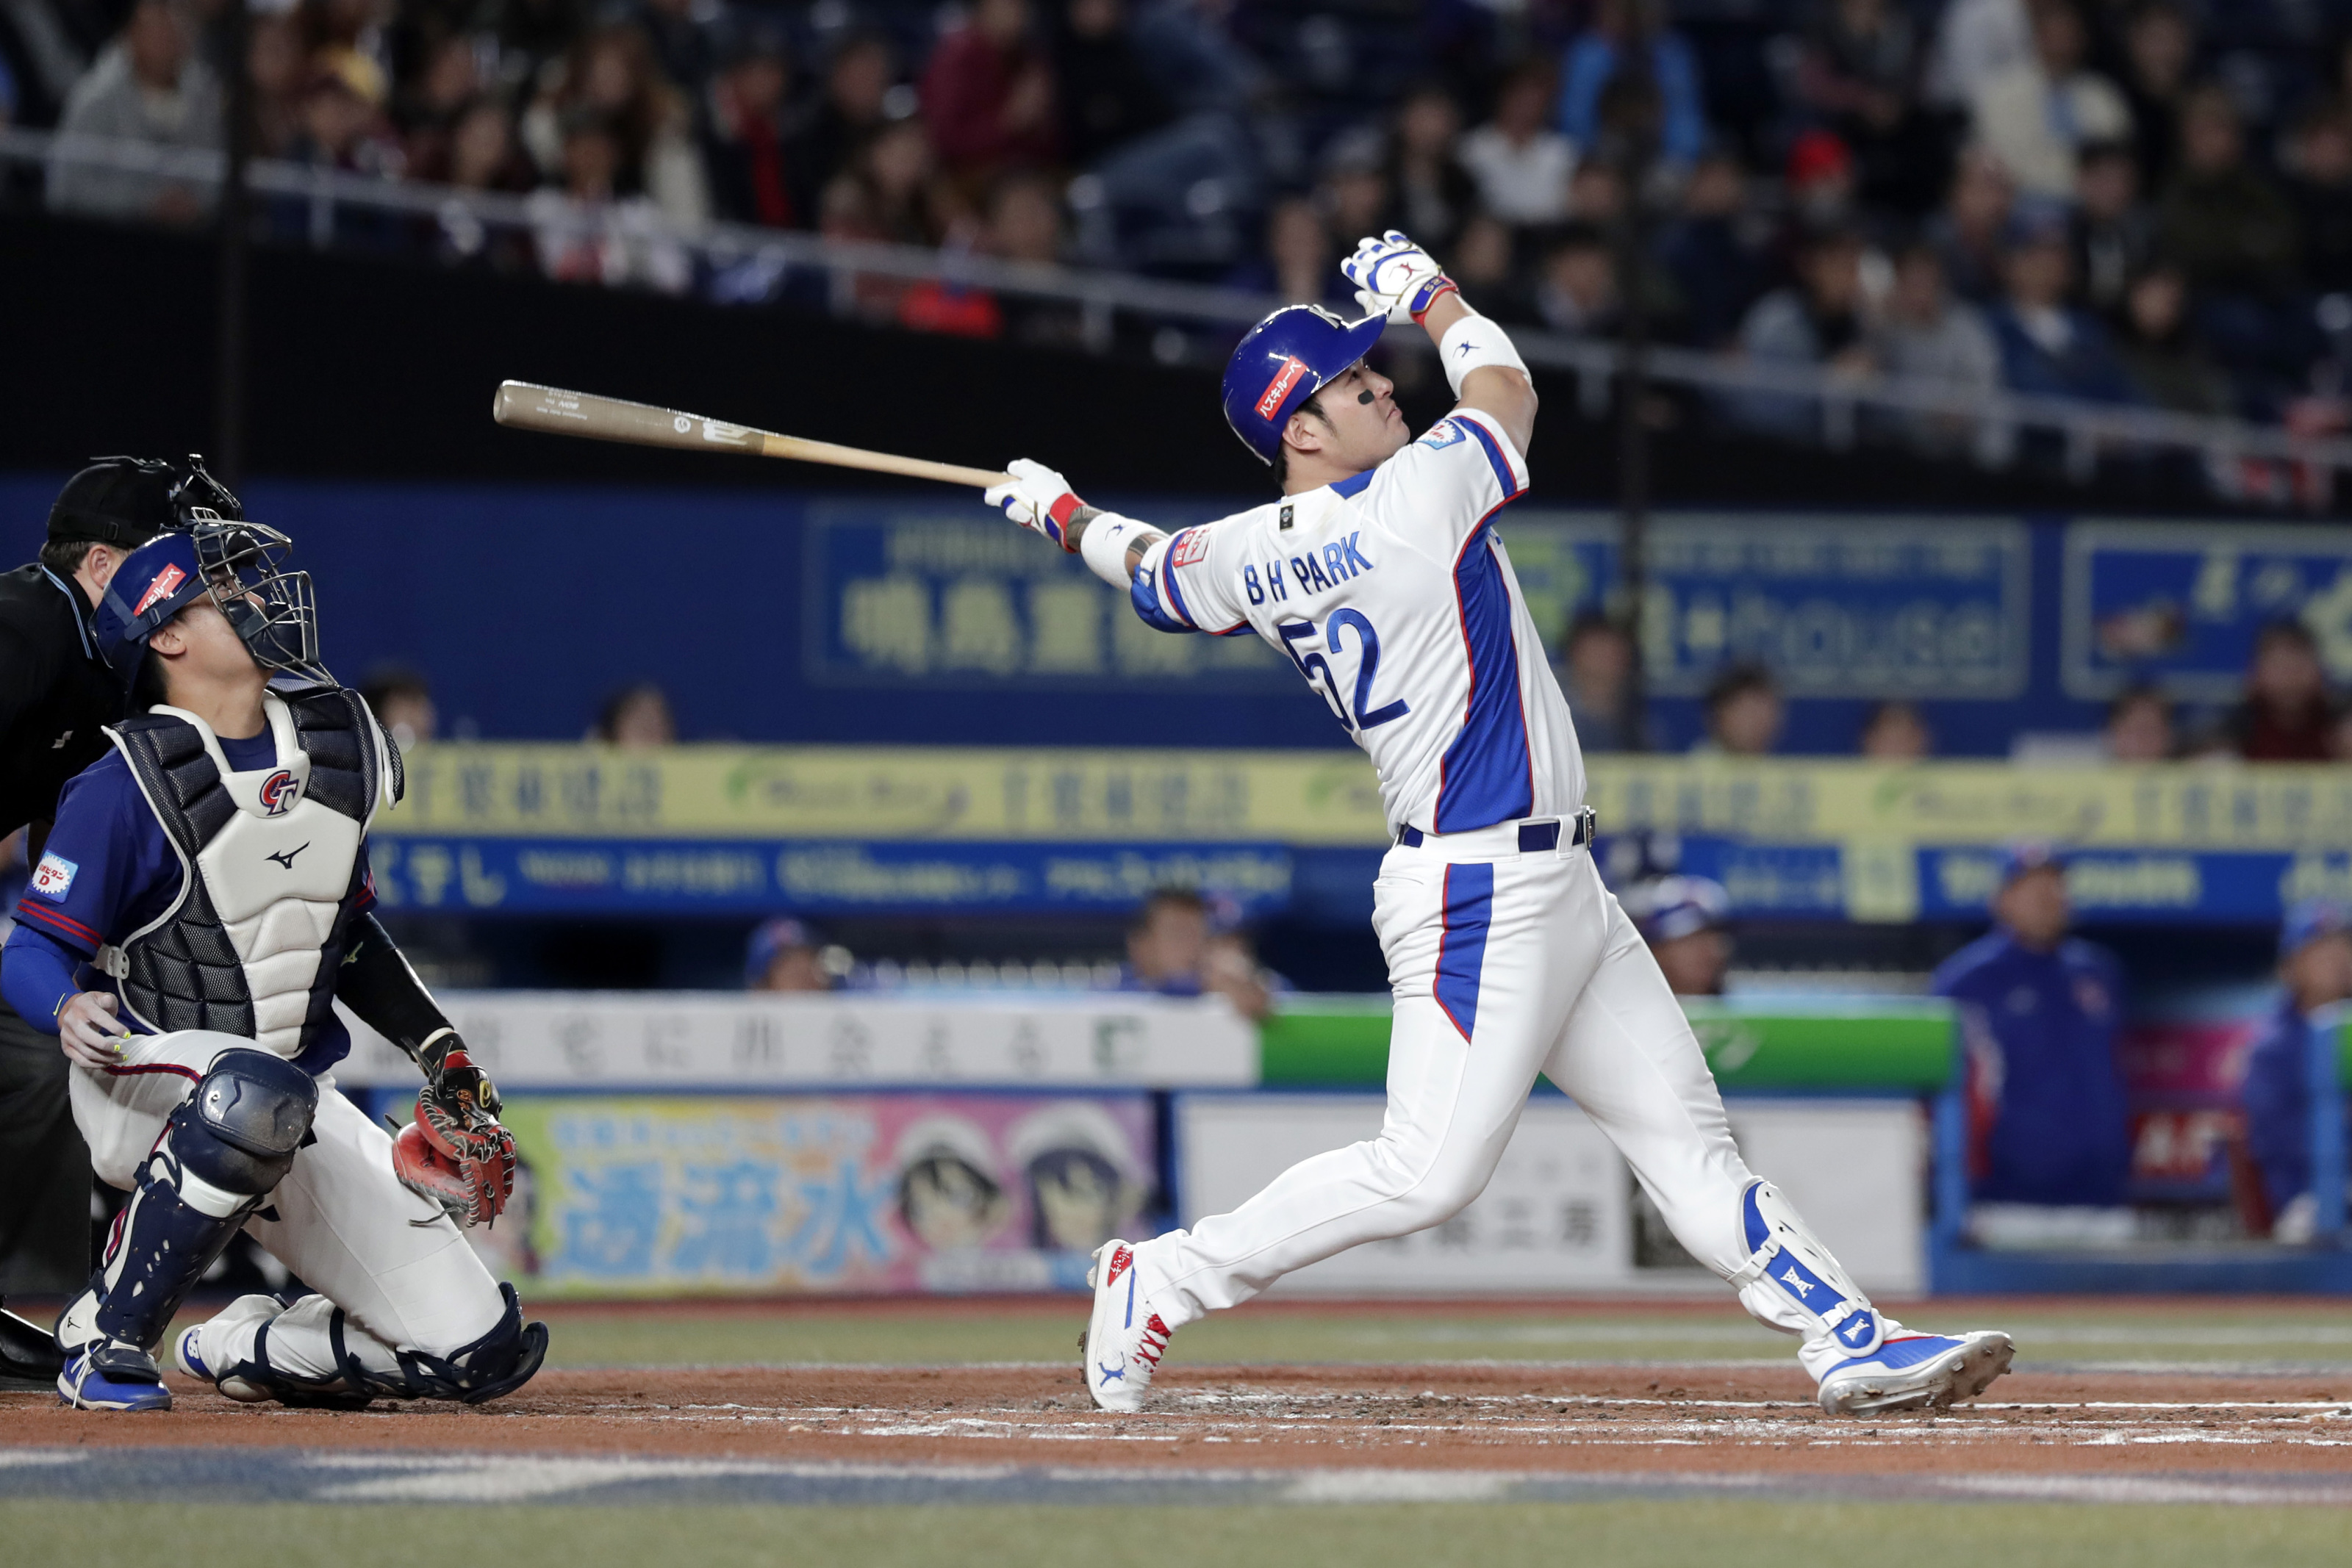 MLB Players Former big-leaguers to watch in the KBO in 2020